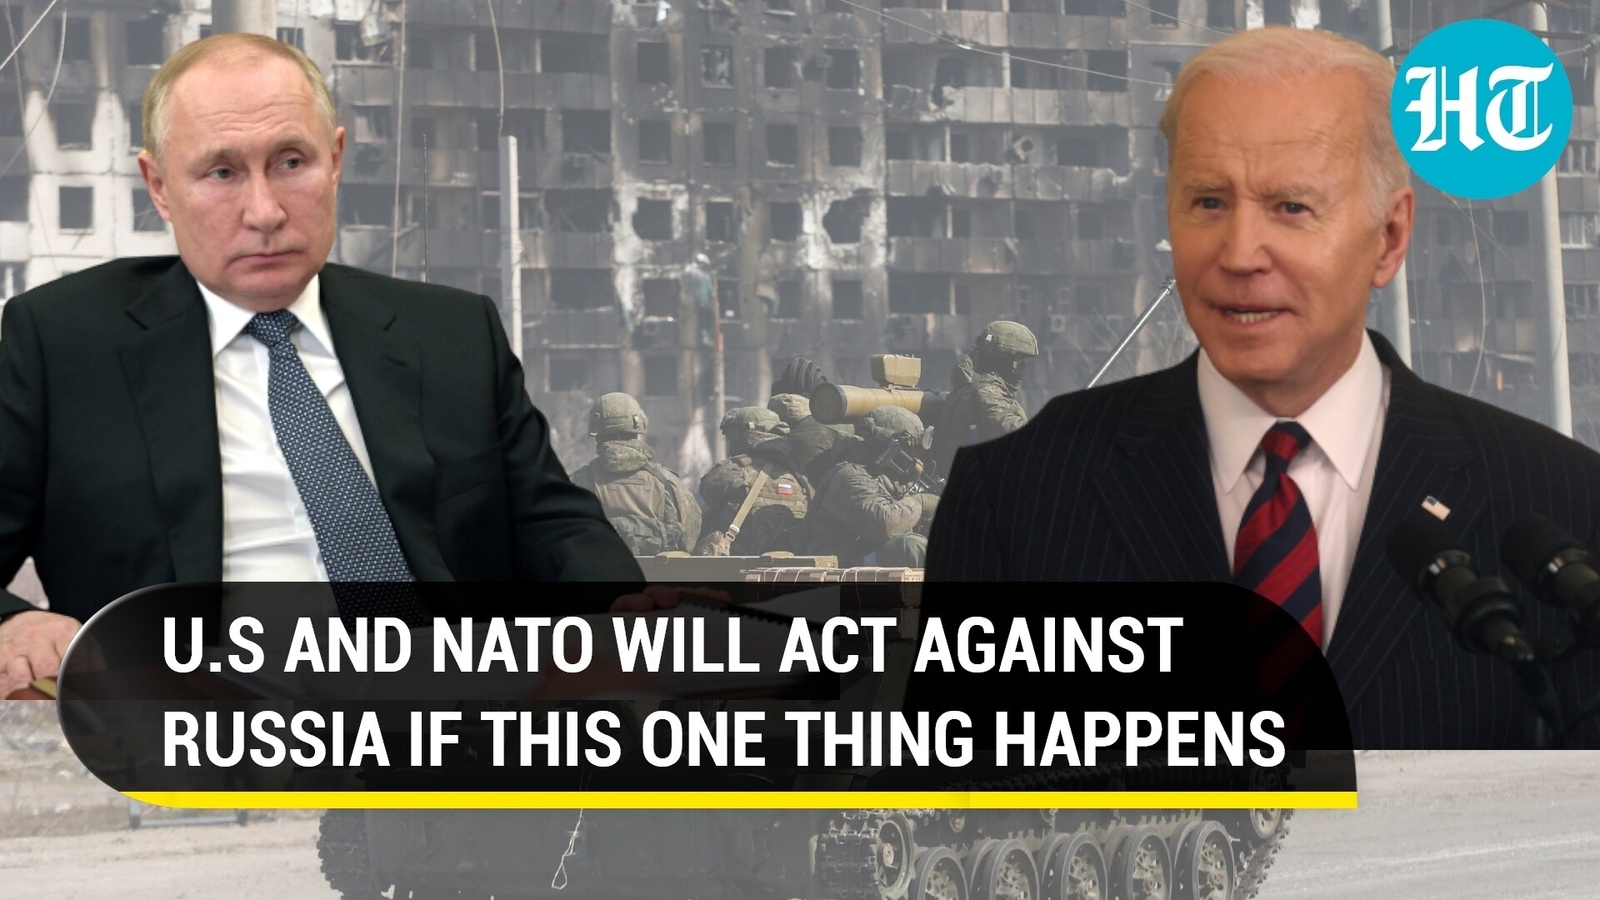 Biden declares U.S & NATO will respond to Russia if Putin uses chemical ...